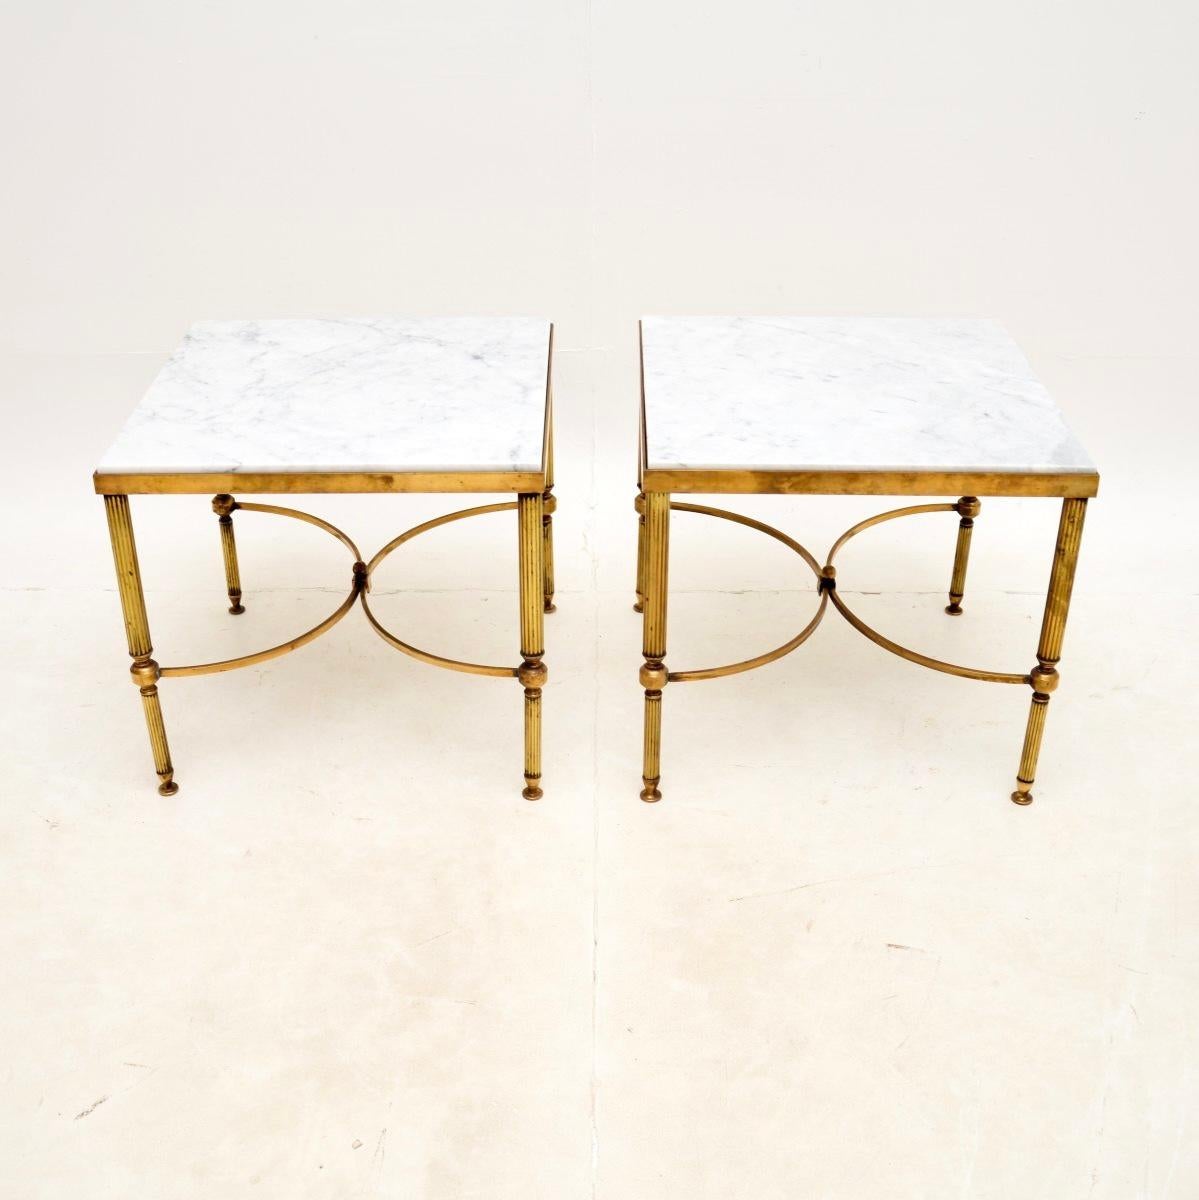 An excellent pair of vintage French brass and marble side tables. They were made in France, and date from the 1960-70’s.

The quality is fantastic, the brass frames have beautifully curved stretchers and fluted legs. They are a very useful and